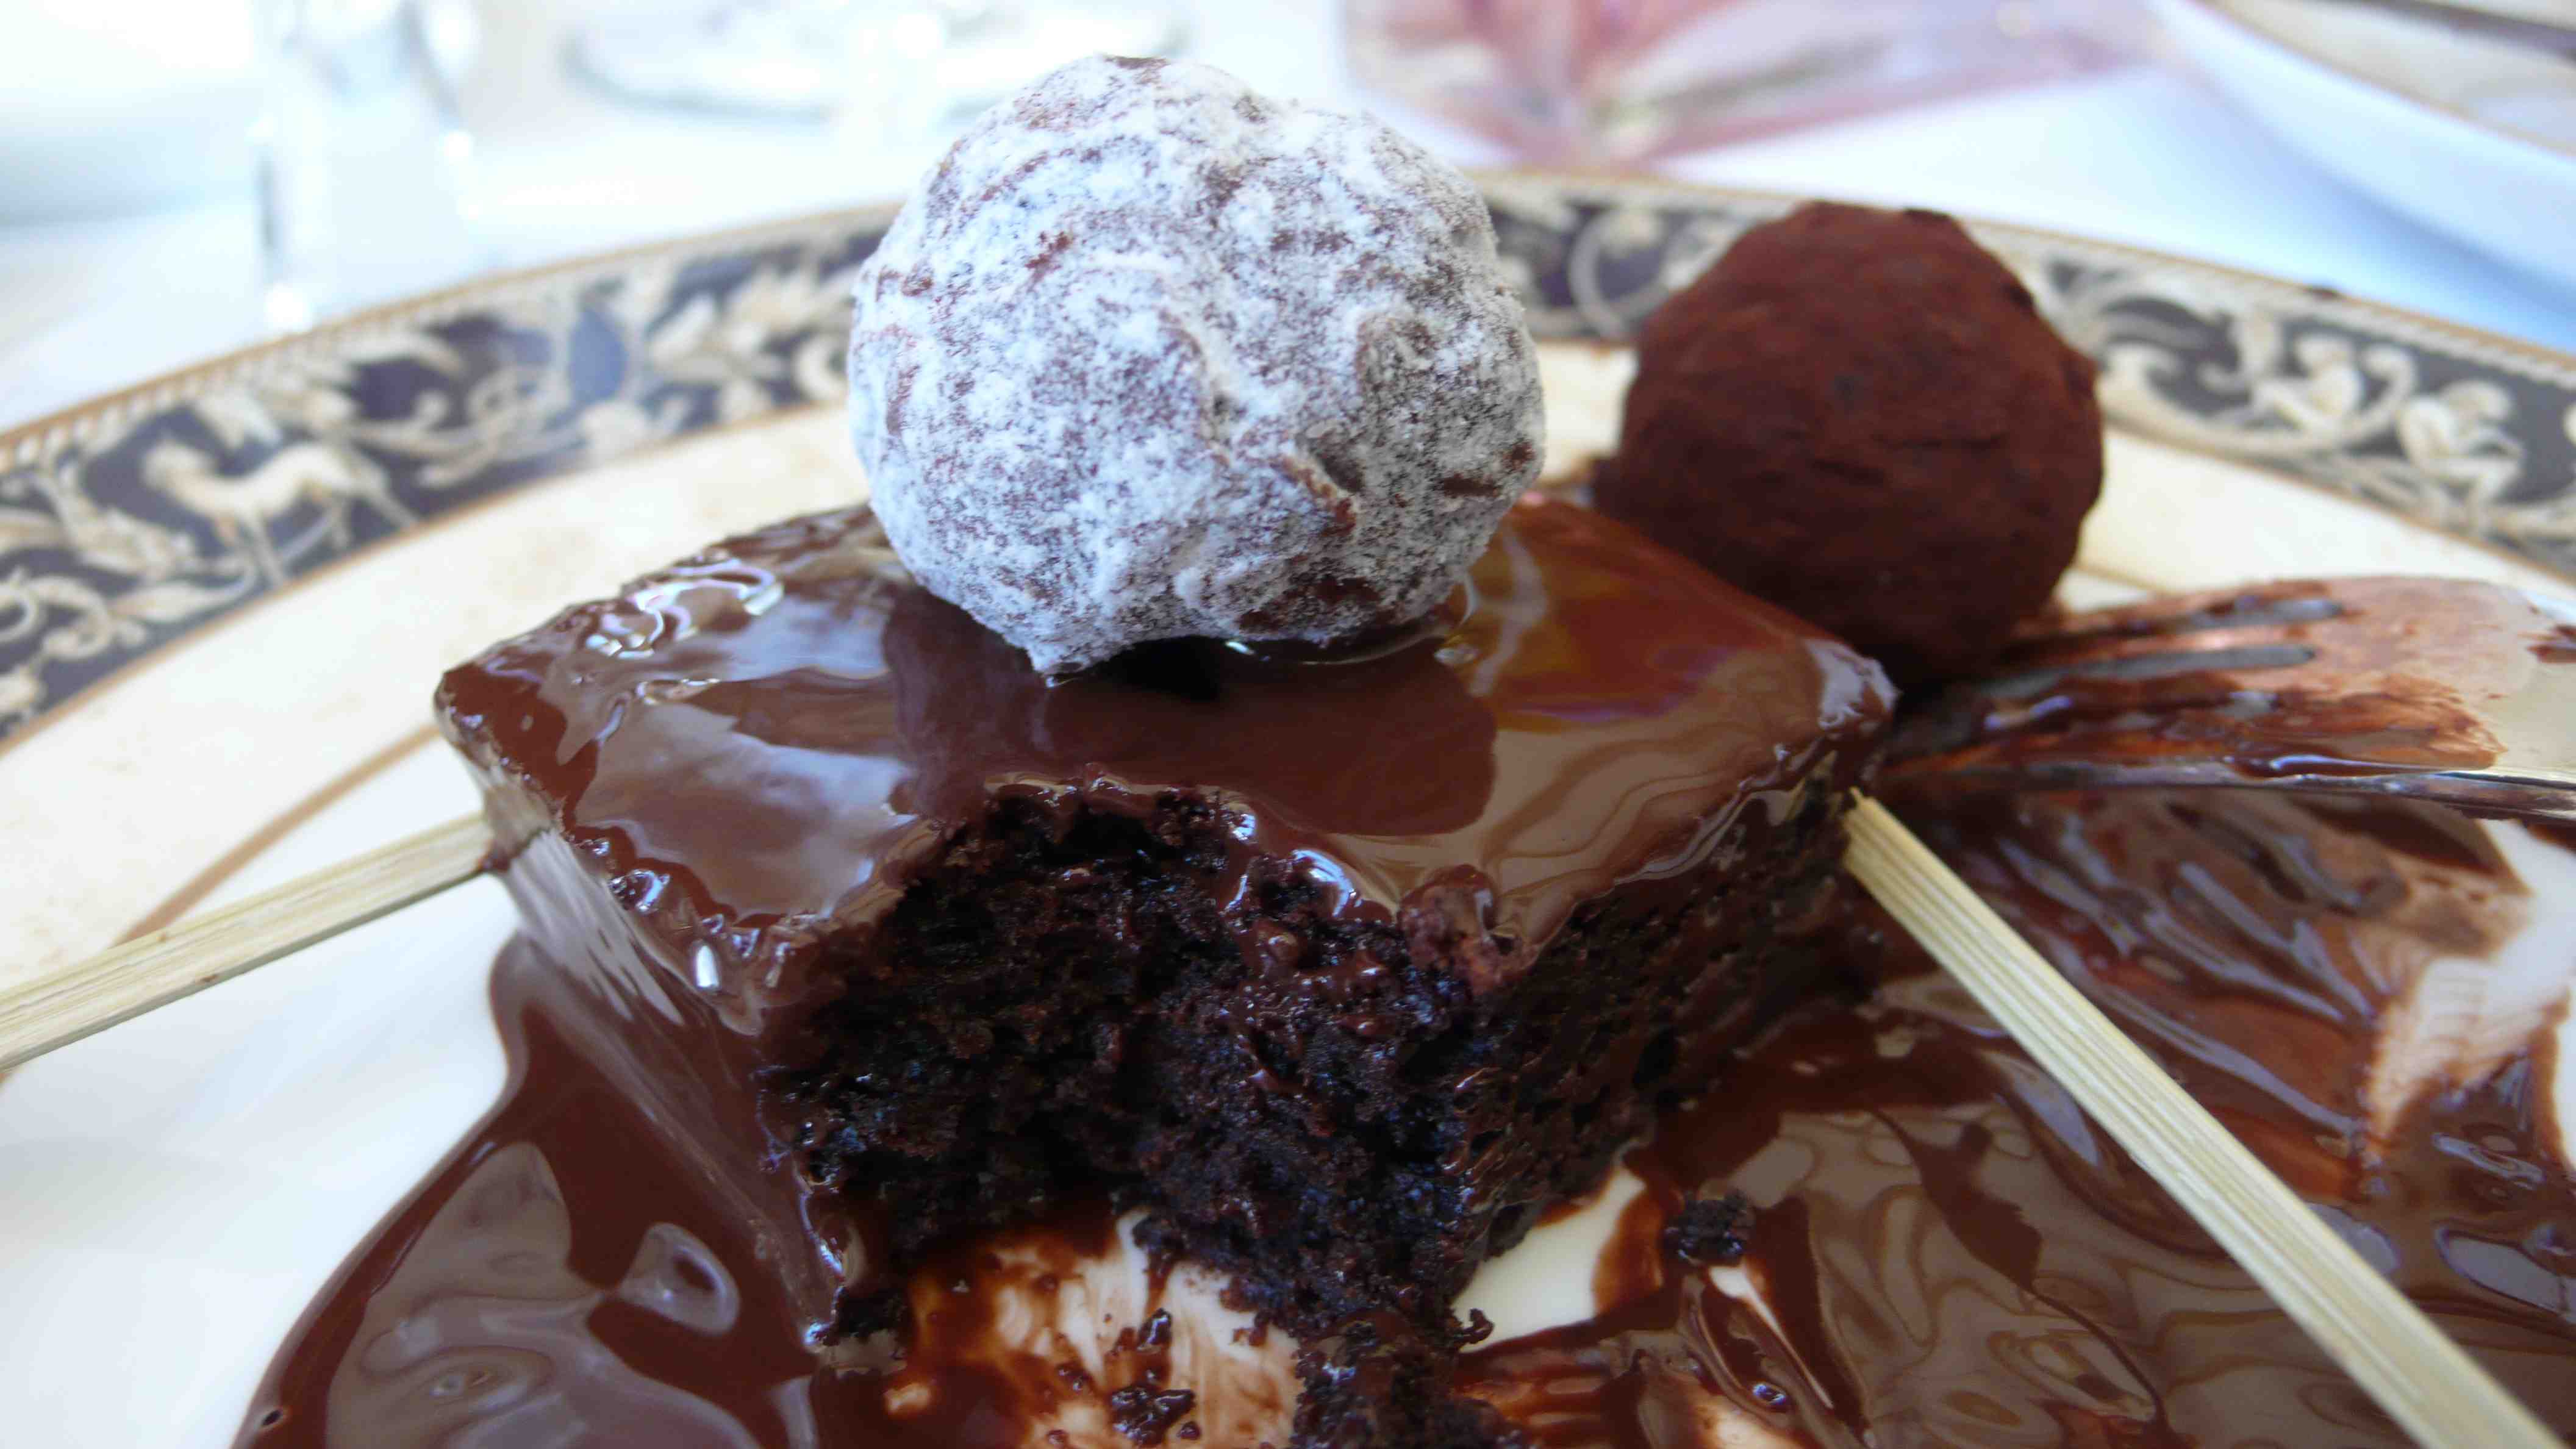 Brownie drenched in chocolate, with a truffle